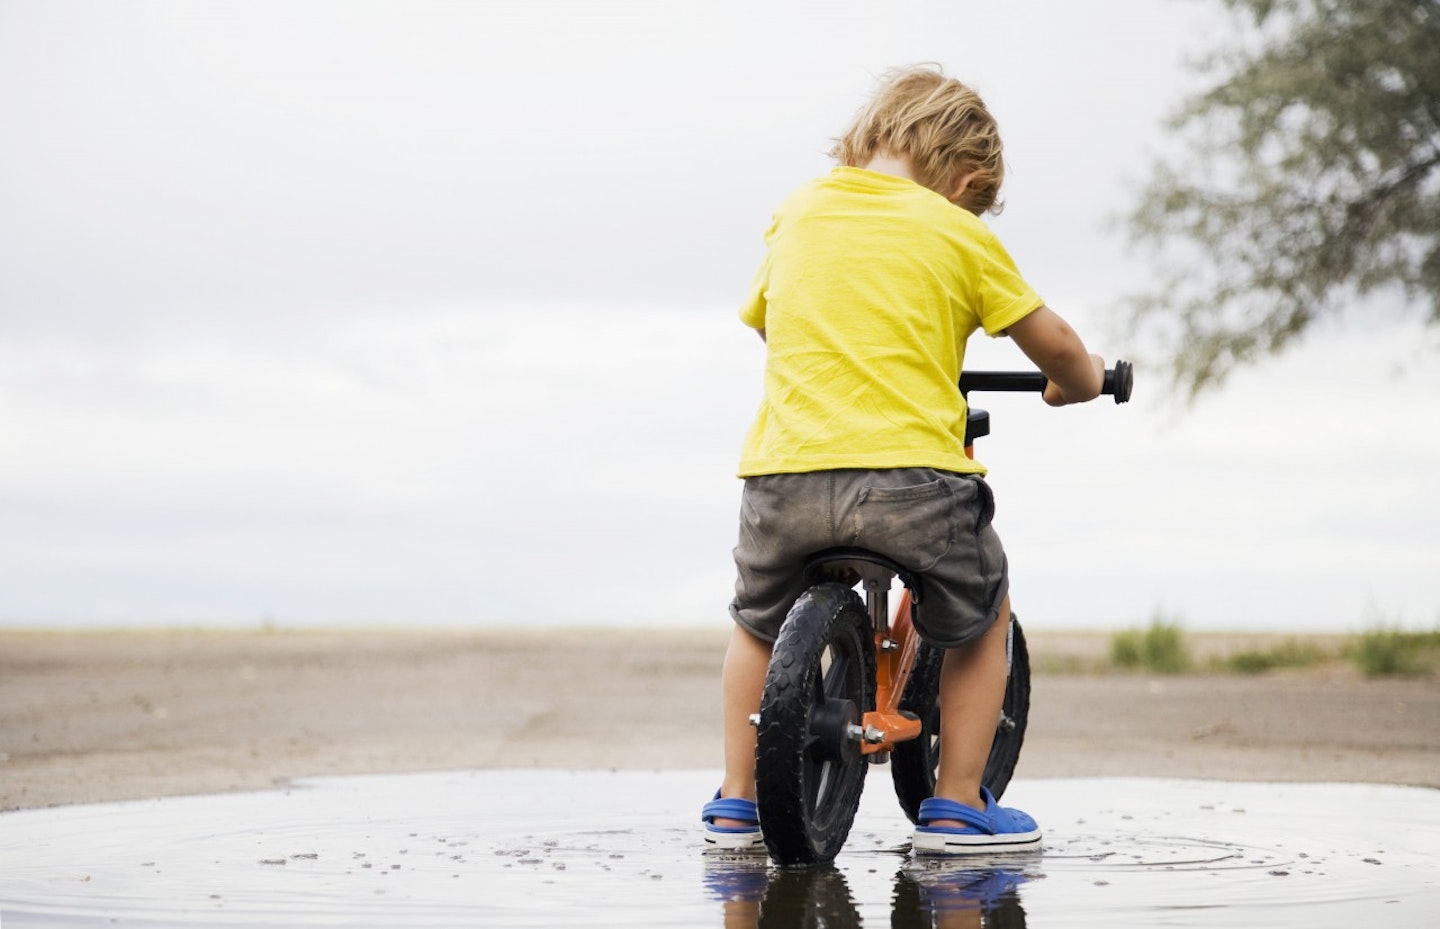  You absolutely have to photograph your toddler’s first bike ride – nothing will beat that huge smile on his face and you’ll want to look back on it in years to come. [Corbis]